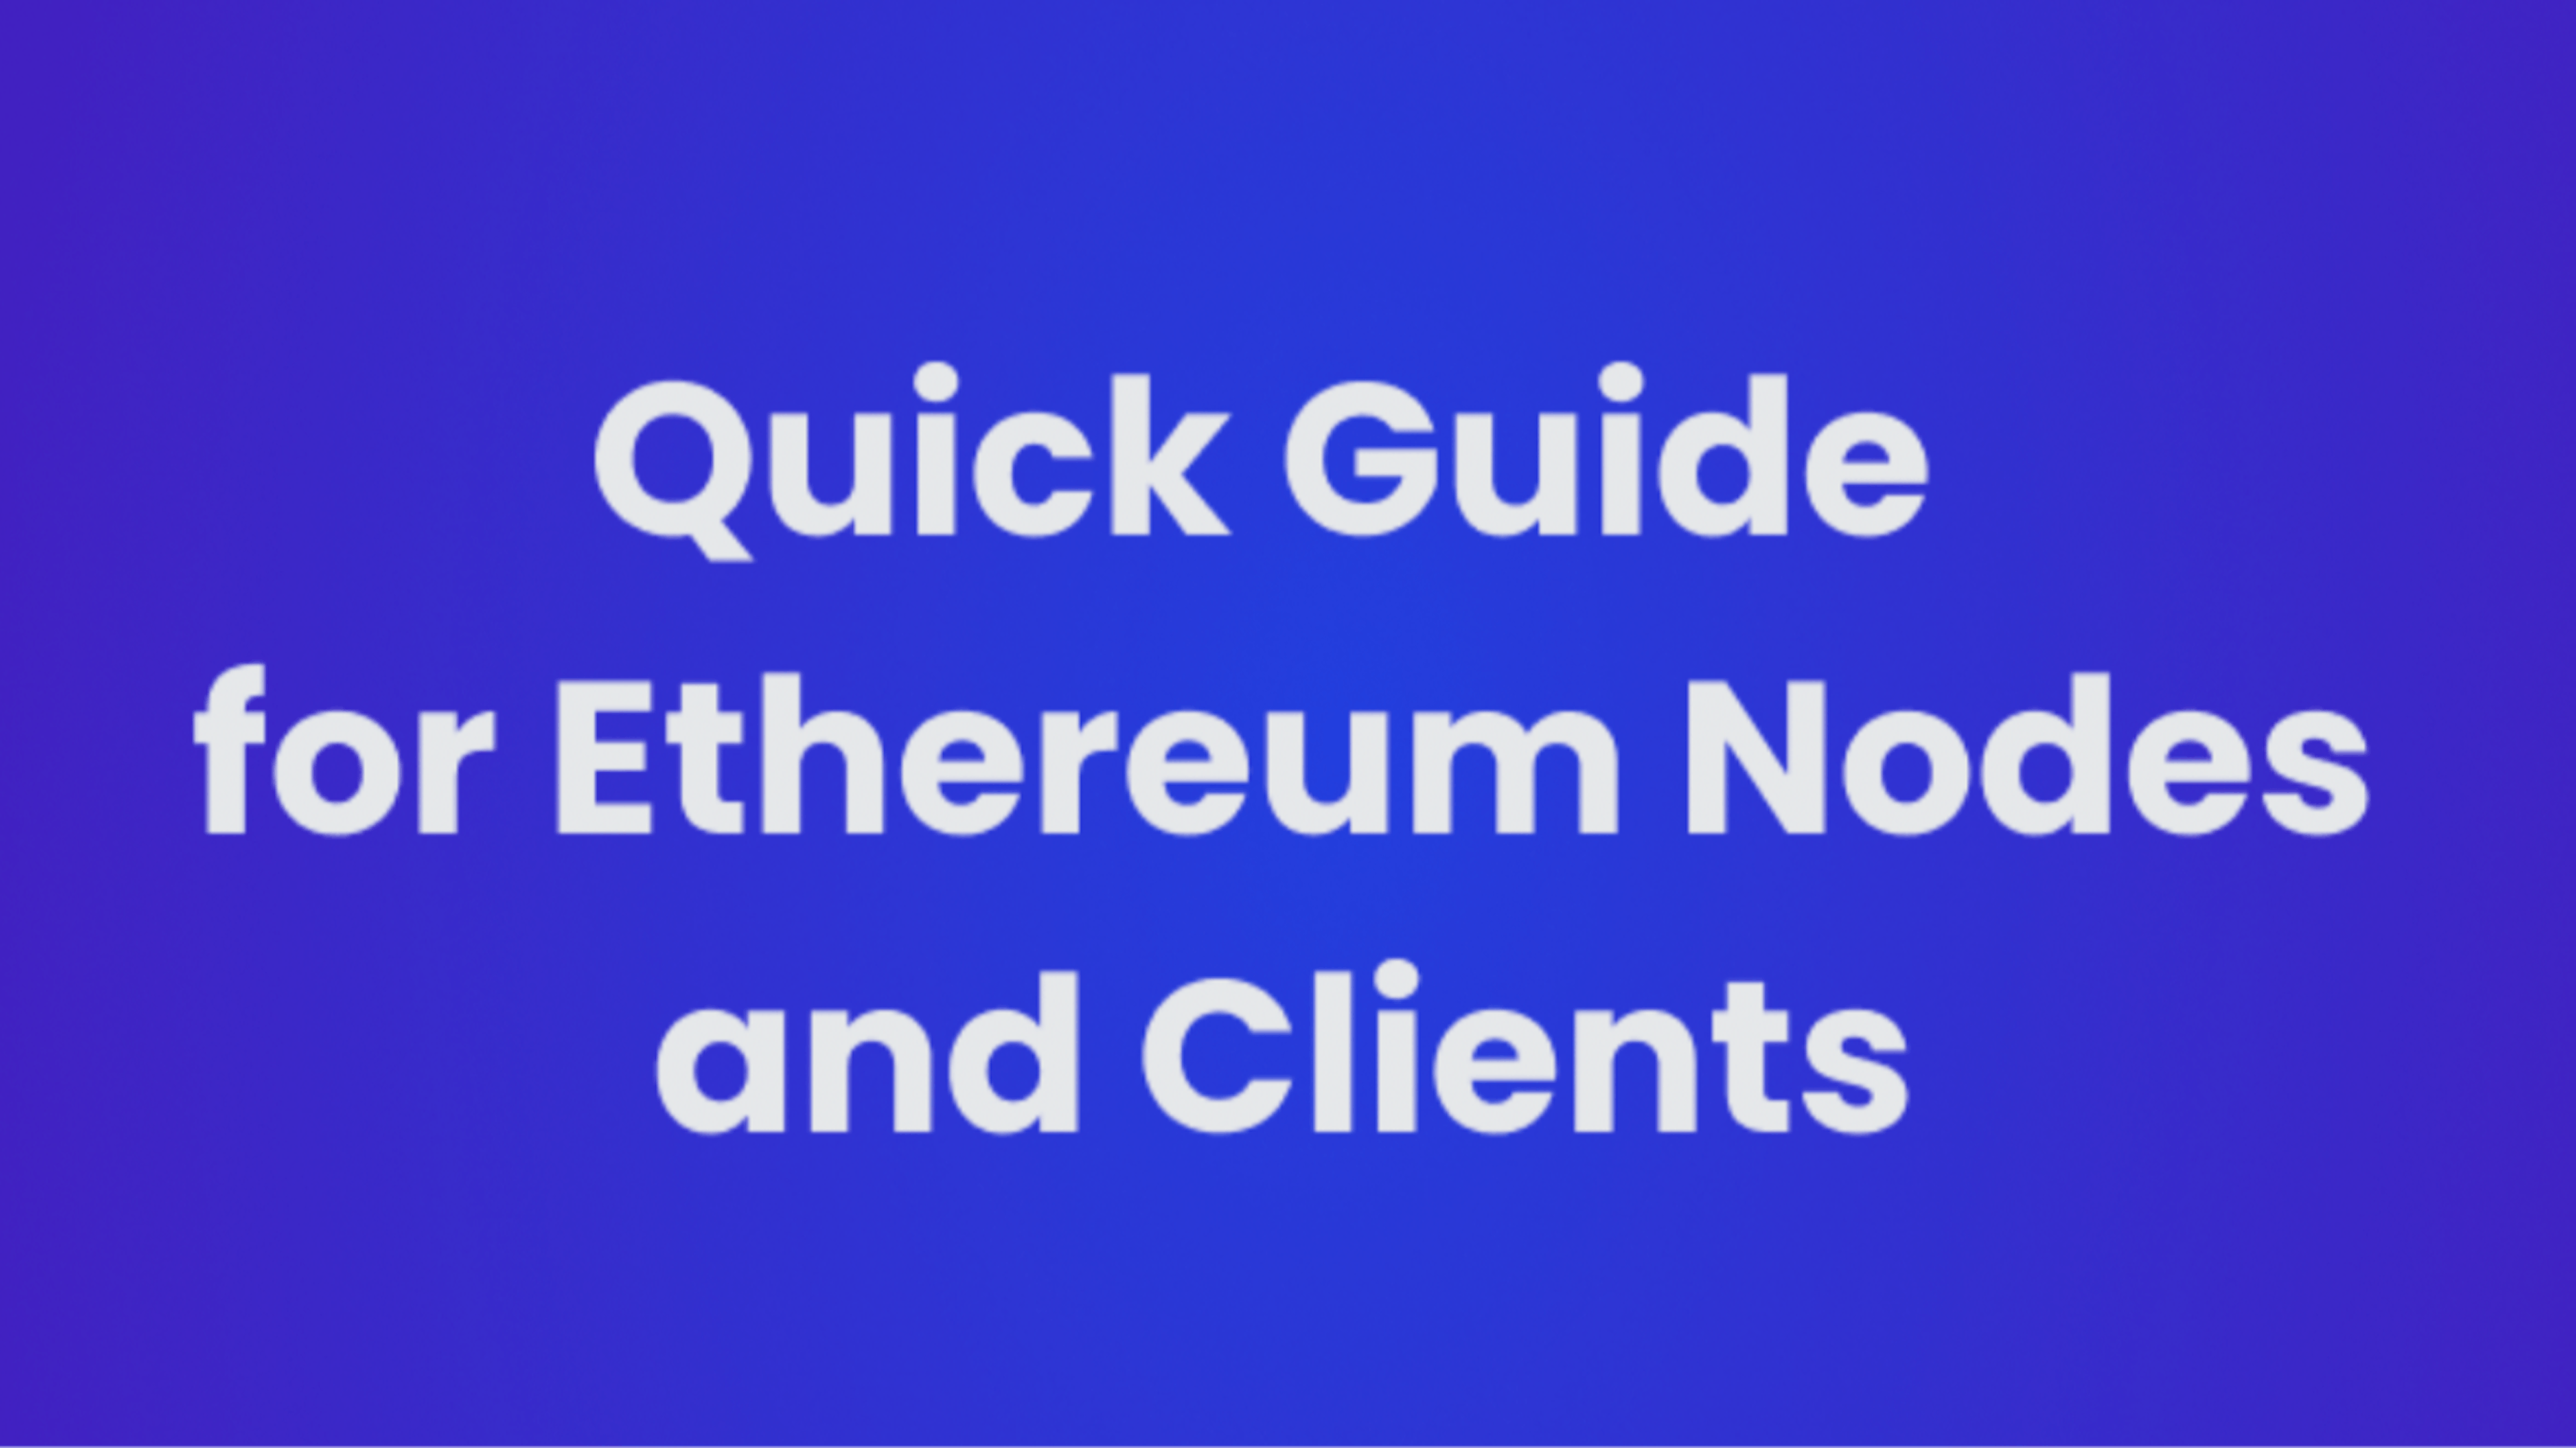 featured image - Ethereum Nodes and Clients: A Quick Guide